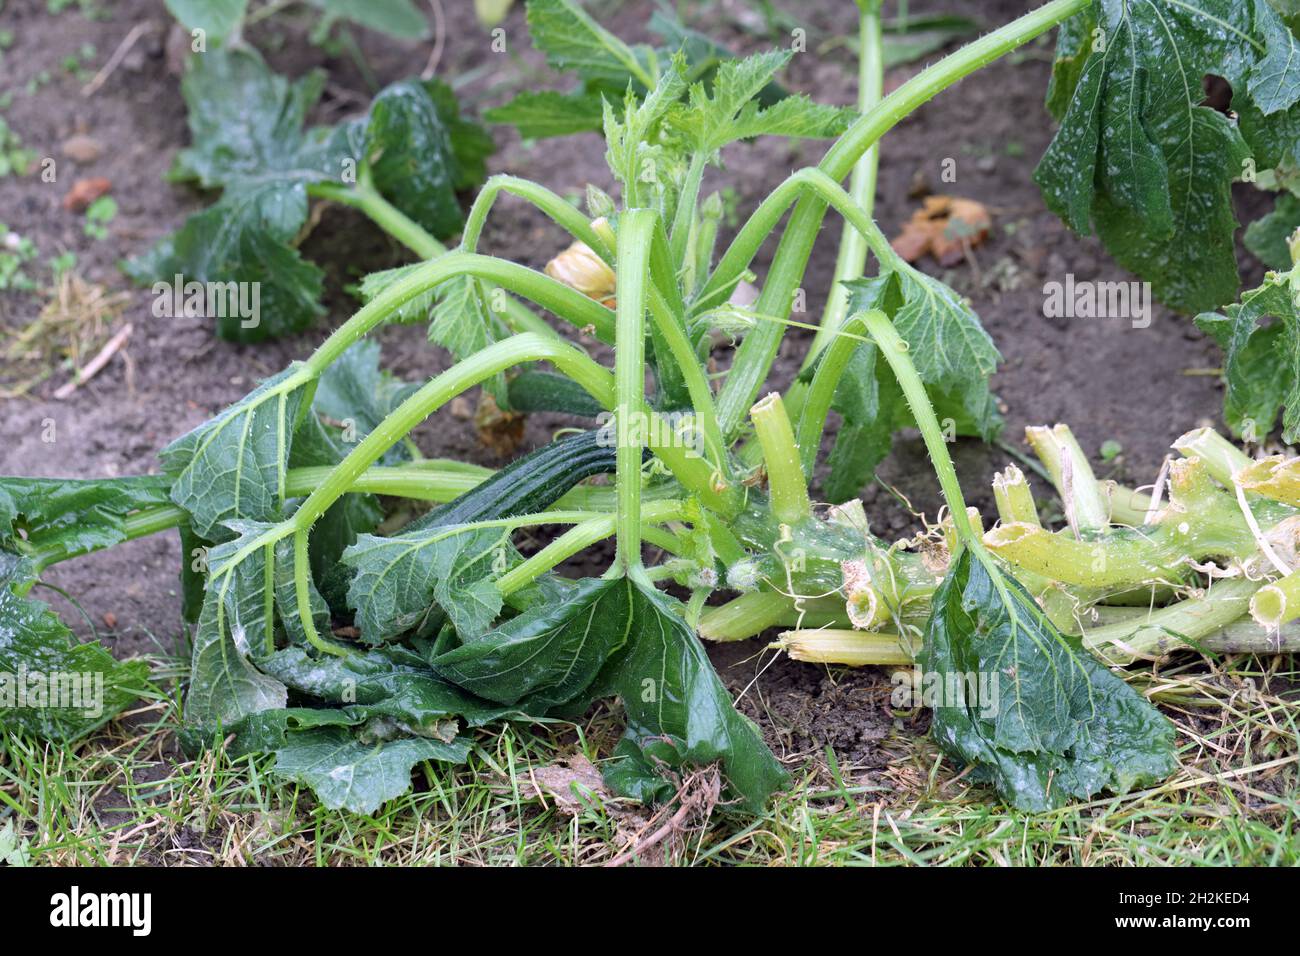 Mold on zucchini leaf, zucchini infected with disease and damaged by frost. Stock Photo